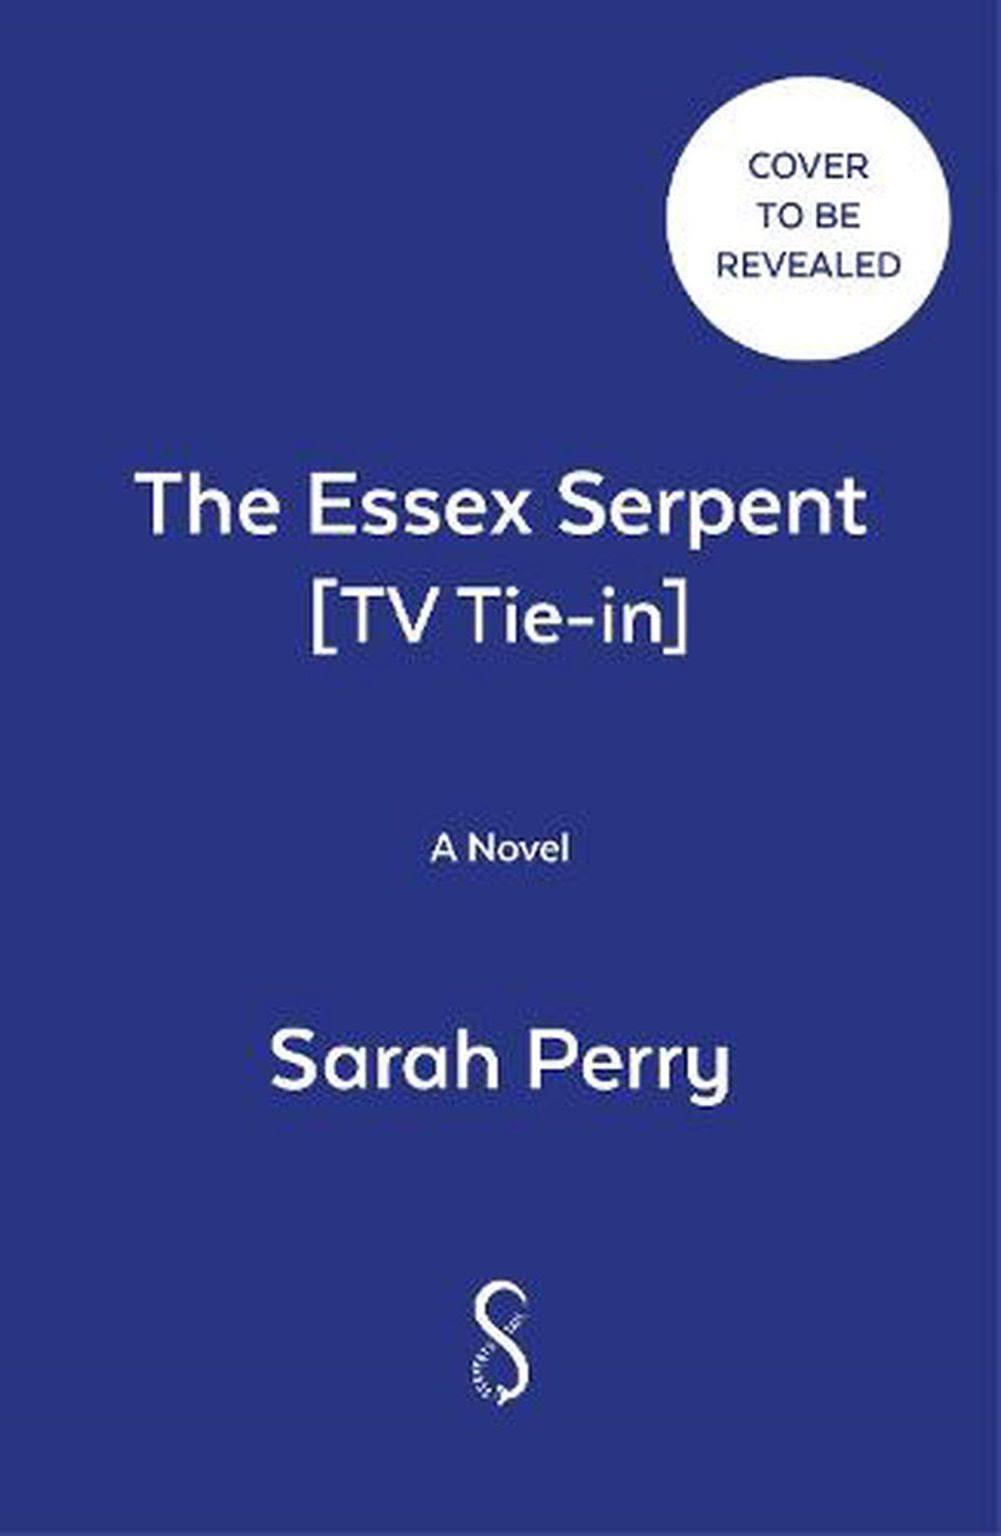 The Essex Serpent (TV Tie-In) by Sarah Perry